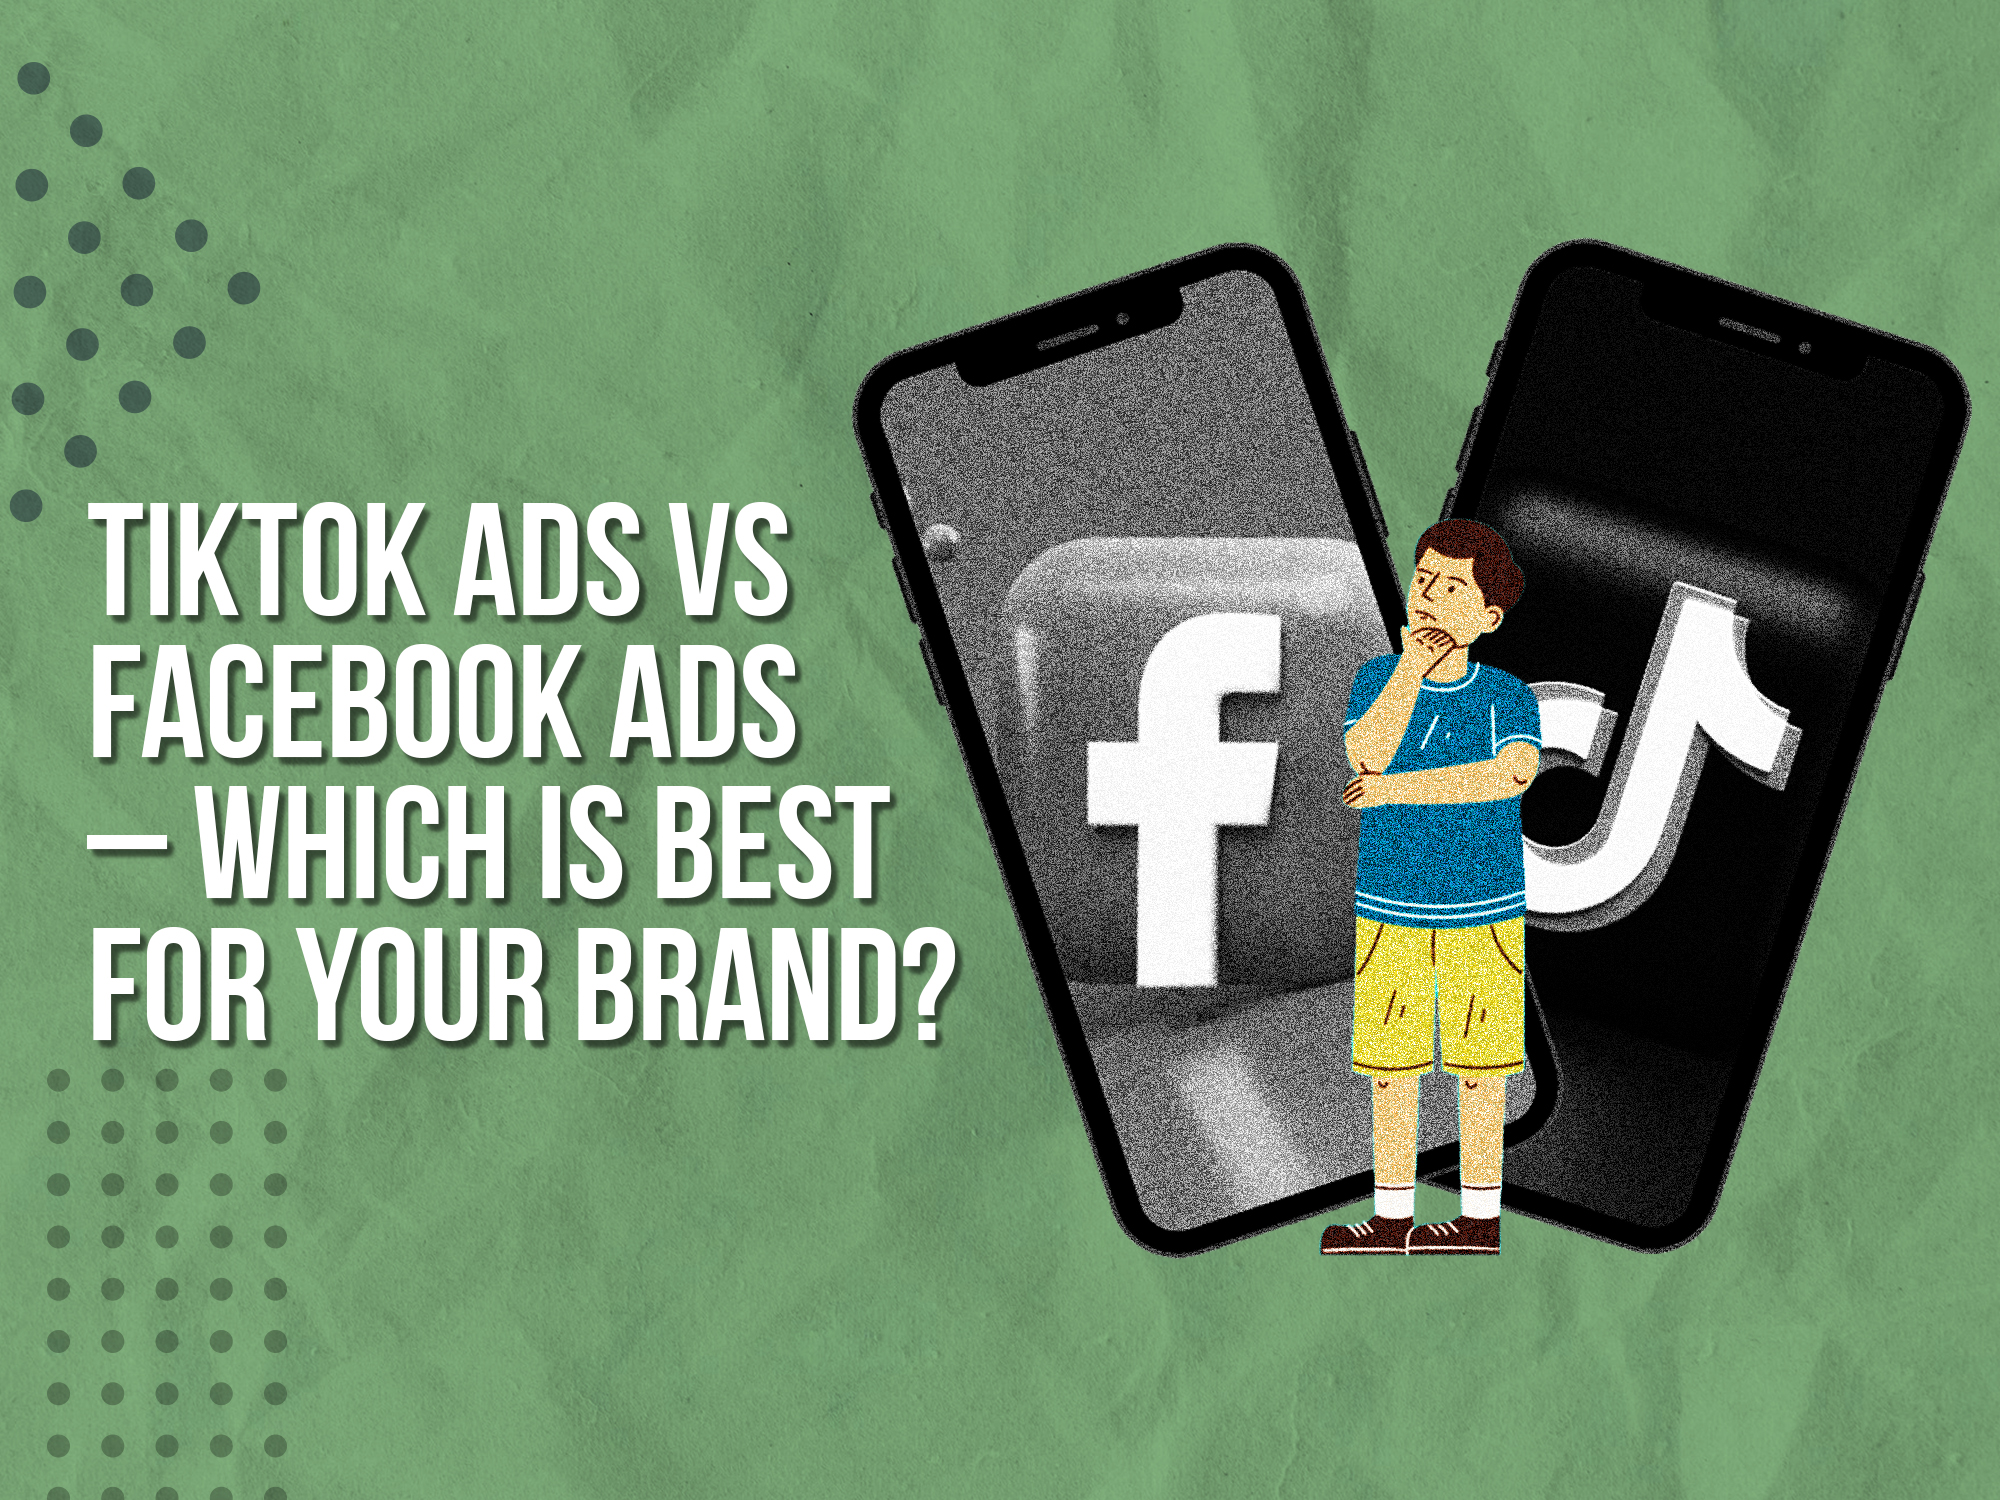 TikTok ads vs Facebook ads – which is best for your brand?